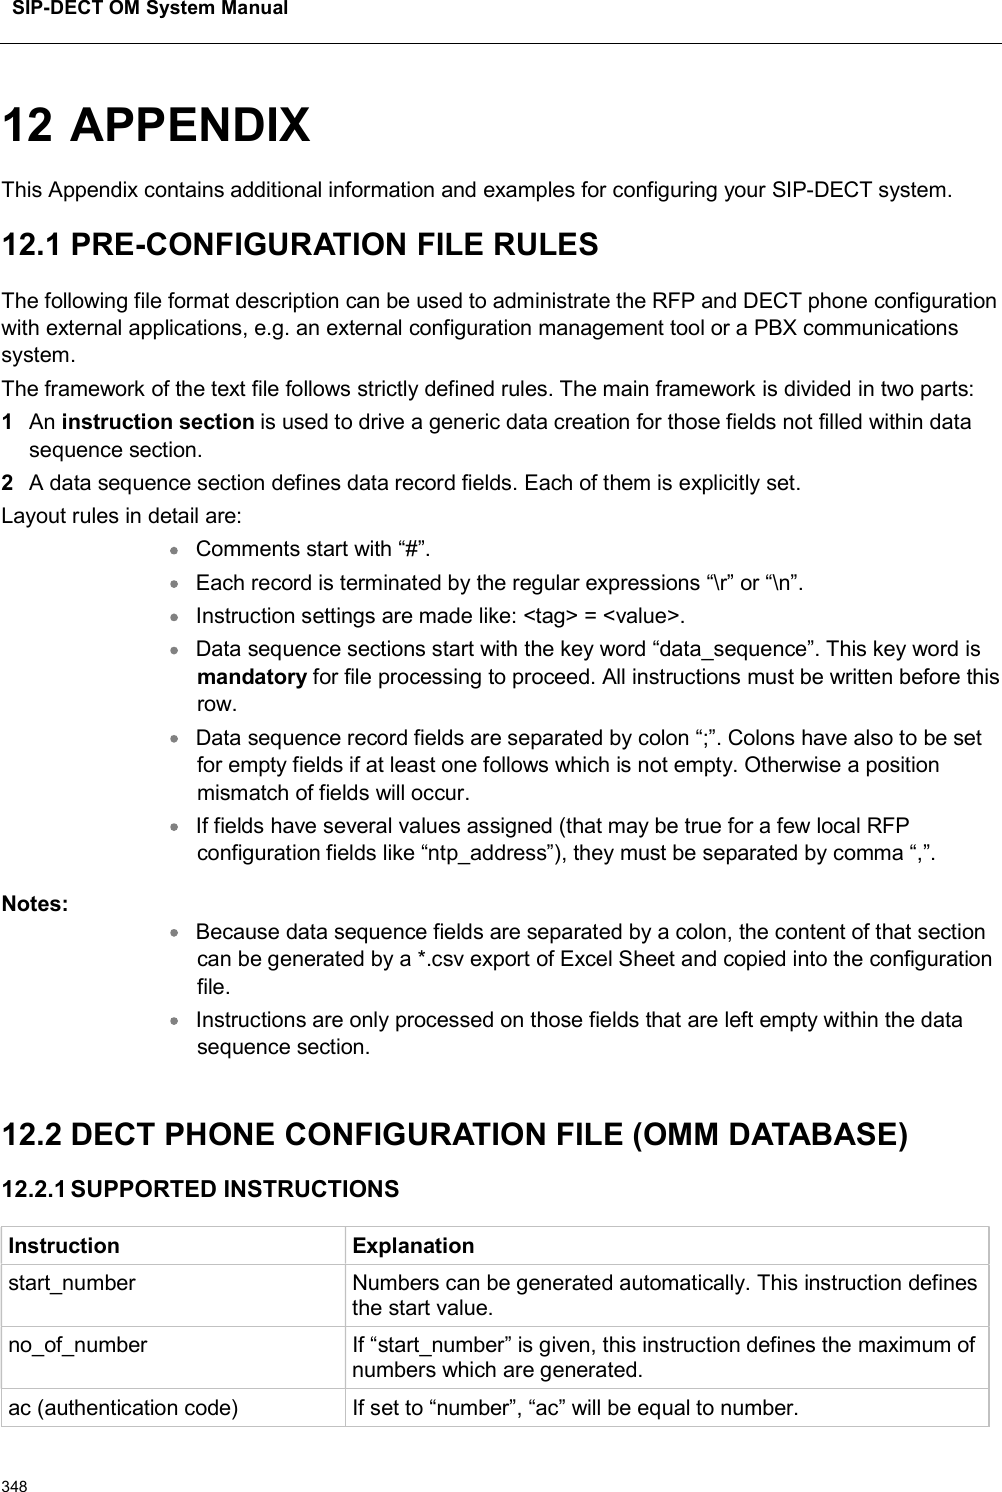 SIP-DECT OM System Manual34812 APPENDIXThis Appendix contains additional information and examples for configuring your SIP-DECT system. 12.1 PRE-CONFIGURATION FILE RULES The following file format description can be used to administrate the RFP and DECT phone configuration with external applications, e.g. an external configuration management tool or a PBX communications system.The framework of the text file follows strictly defined rules. The main framework is divided in two parts:1An instruction section is used to drive a generic data creation for those fields not filled within data sequence section. 2A data sequence section defines data record fields. Each of them is explicitly set. Layout rules in detail are:Comments start with “#”.Each record is terminated by the regular expressions “\r” or “\n”.Instruction settings are made like: &lt;tag&gt; = &lt;value&gt;. Data sequence sections start with the key word “data_sequence”. This key word is mandatory for file processing to proceed. All instructions must be written before this row.Data sequence record fields are separated by colon “;”. Colons have also to be set for empty fields if at least one follows which is not empty. Otherwise a position mismatch of fields will occur.If fields have several values assigned (that may be true for a few local RFP configuration fields like “ntp_address”), they must be separated by comma “,”.Notes: Because data sequence fields are separated by a colon, the content of that section can be generated by a *.csv export of Excel Sheet and copied into the configuration file.Instructions are only processed on those fields that are left empty within the data sequence section.12.2 DECT PHONE CONFIGURATION FILE (OMM DATABASE)12.2.1 SUPPORTED INSTRUCTIONSInstruction Explanationstart_number Numbers can be generated automatically. This instruction defines the start value.no_of_number If “start_number” is given, this instruction defines the maximum of numbers which are generated.ac (authentication code) If set to “number”, “ac” will be equal to number.